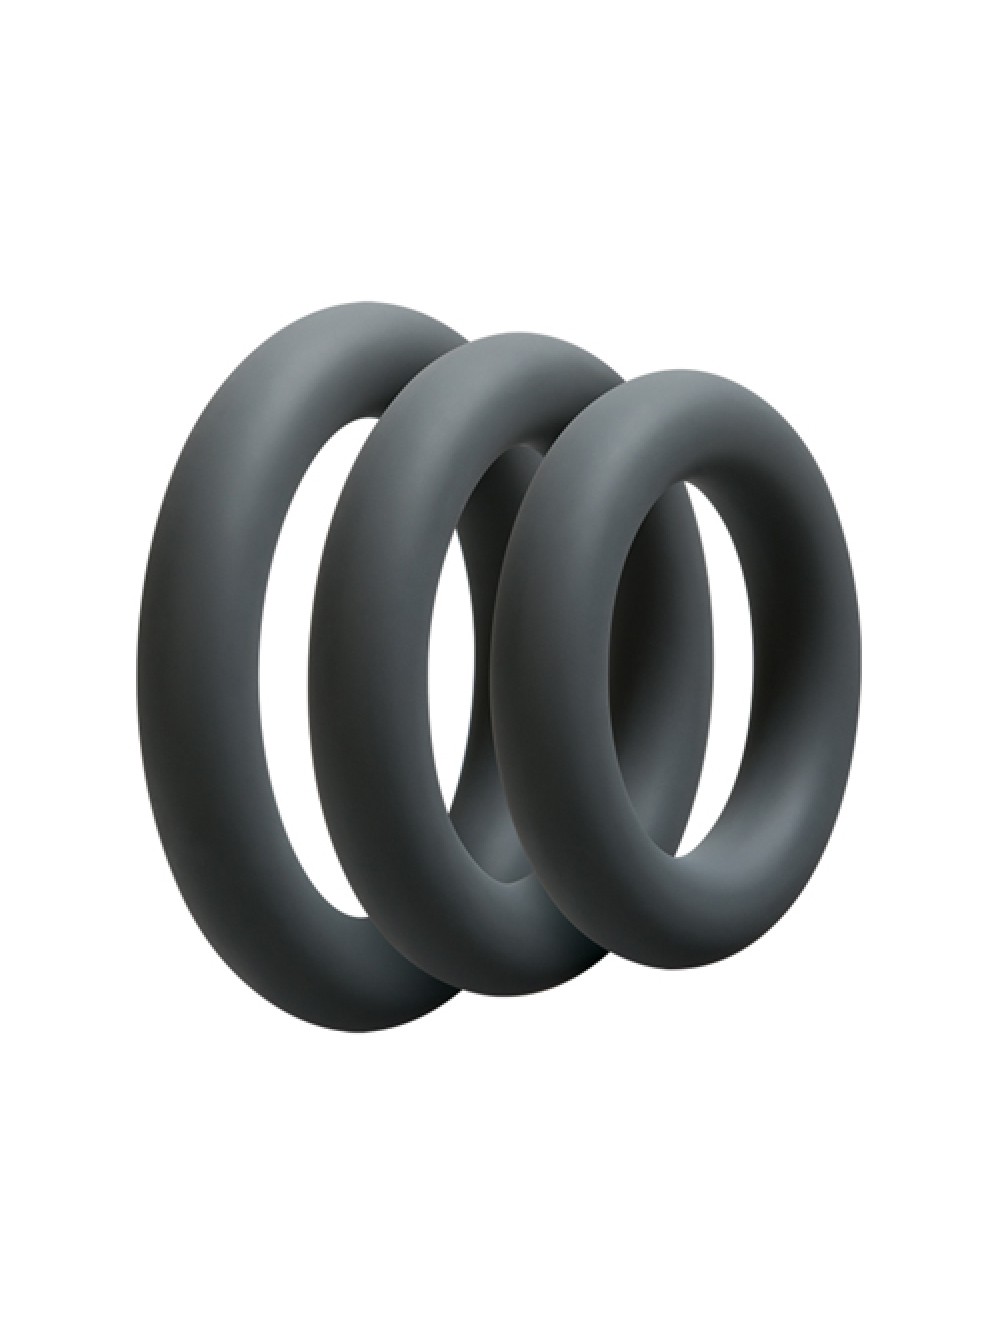 3 C-Ring Set - Thick - Slate 782421019297